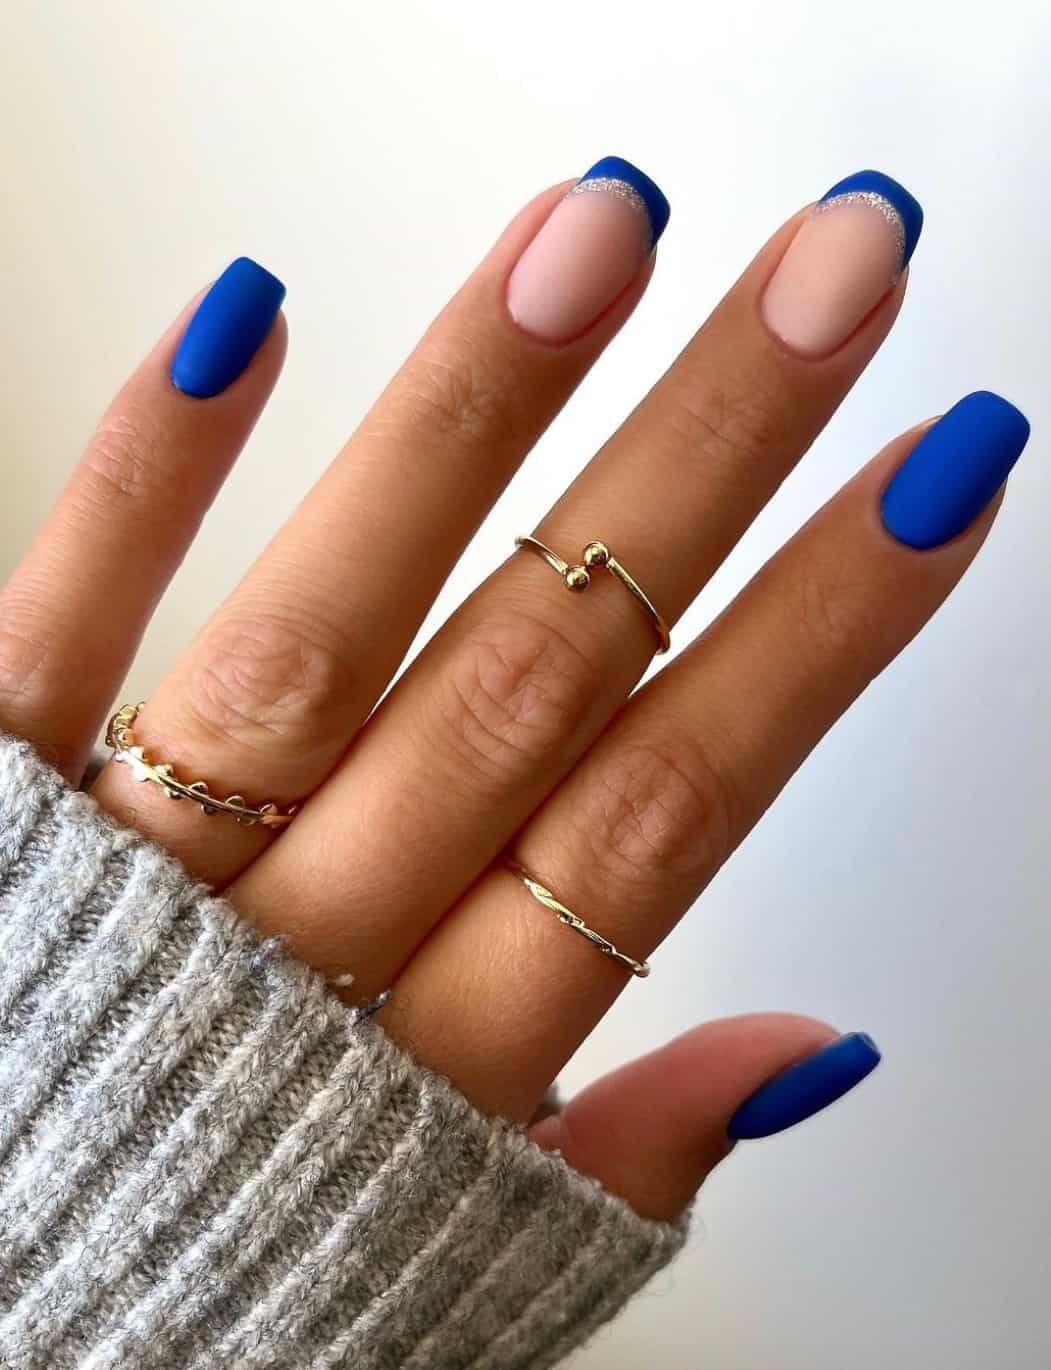 A hand with short square nails featuring solid-colored nails and French tip nails painted with royal blue, silver glitter accents, and a matte finish